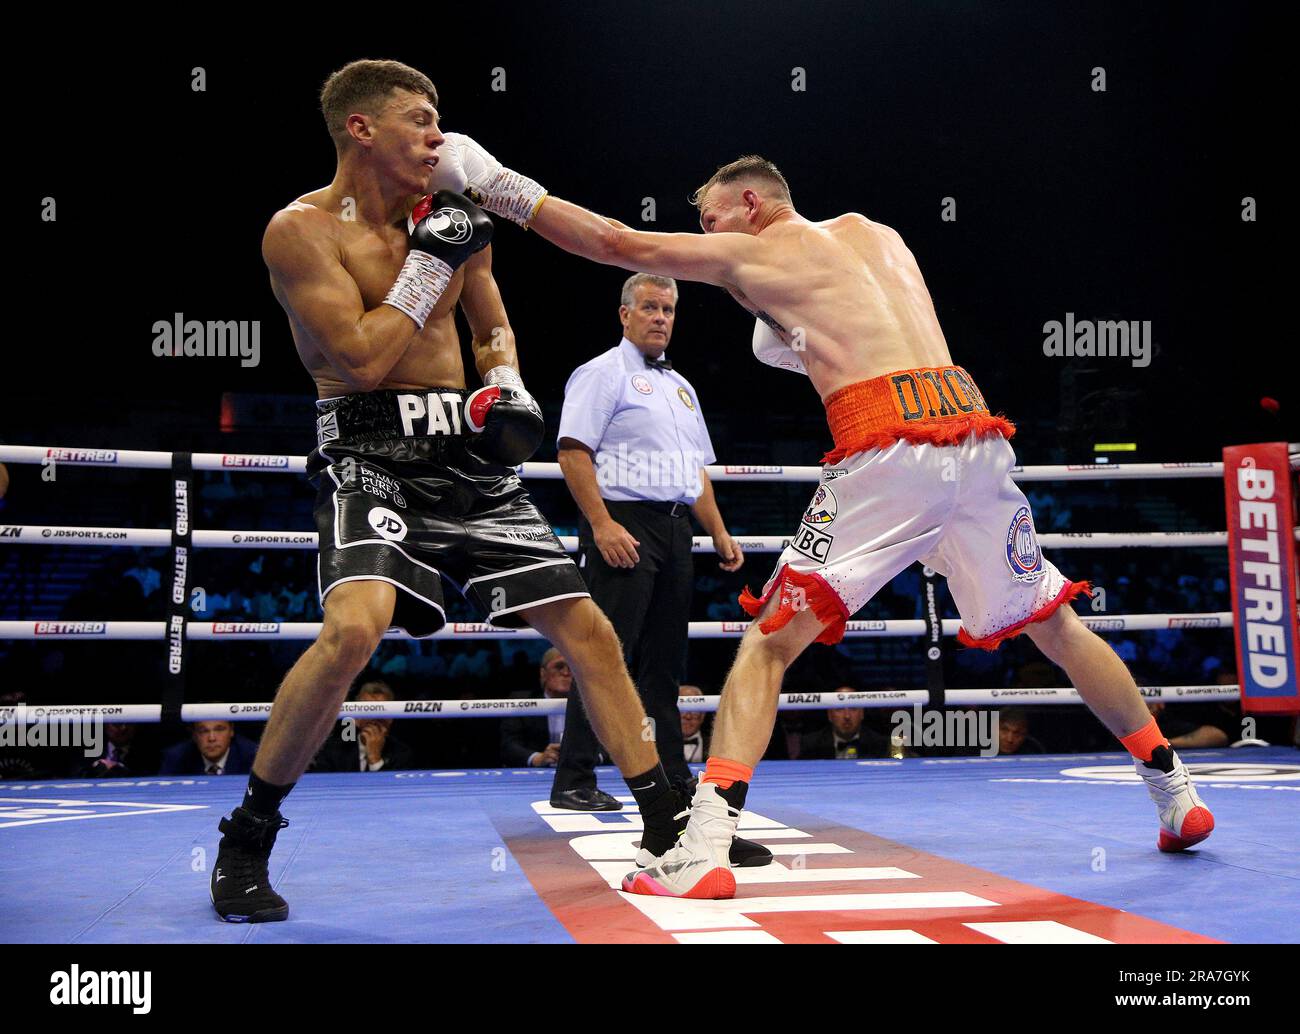 Pat McCormack (left) and Tony Dixon in action during their WBA Continental Super-Welterweight Title bout at the Utilita Arena Sheffield. Picture date: Saturday July 1, 2023. Stock Photo